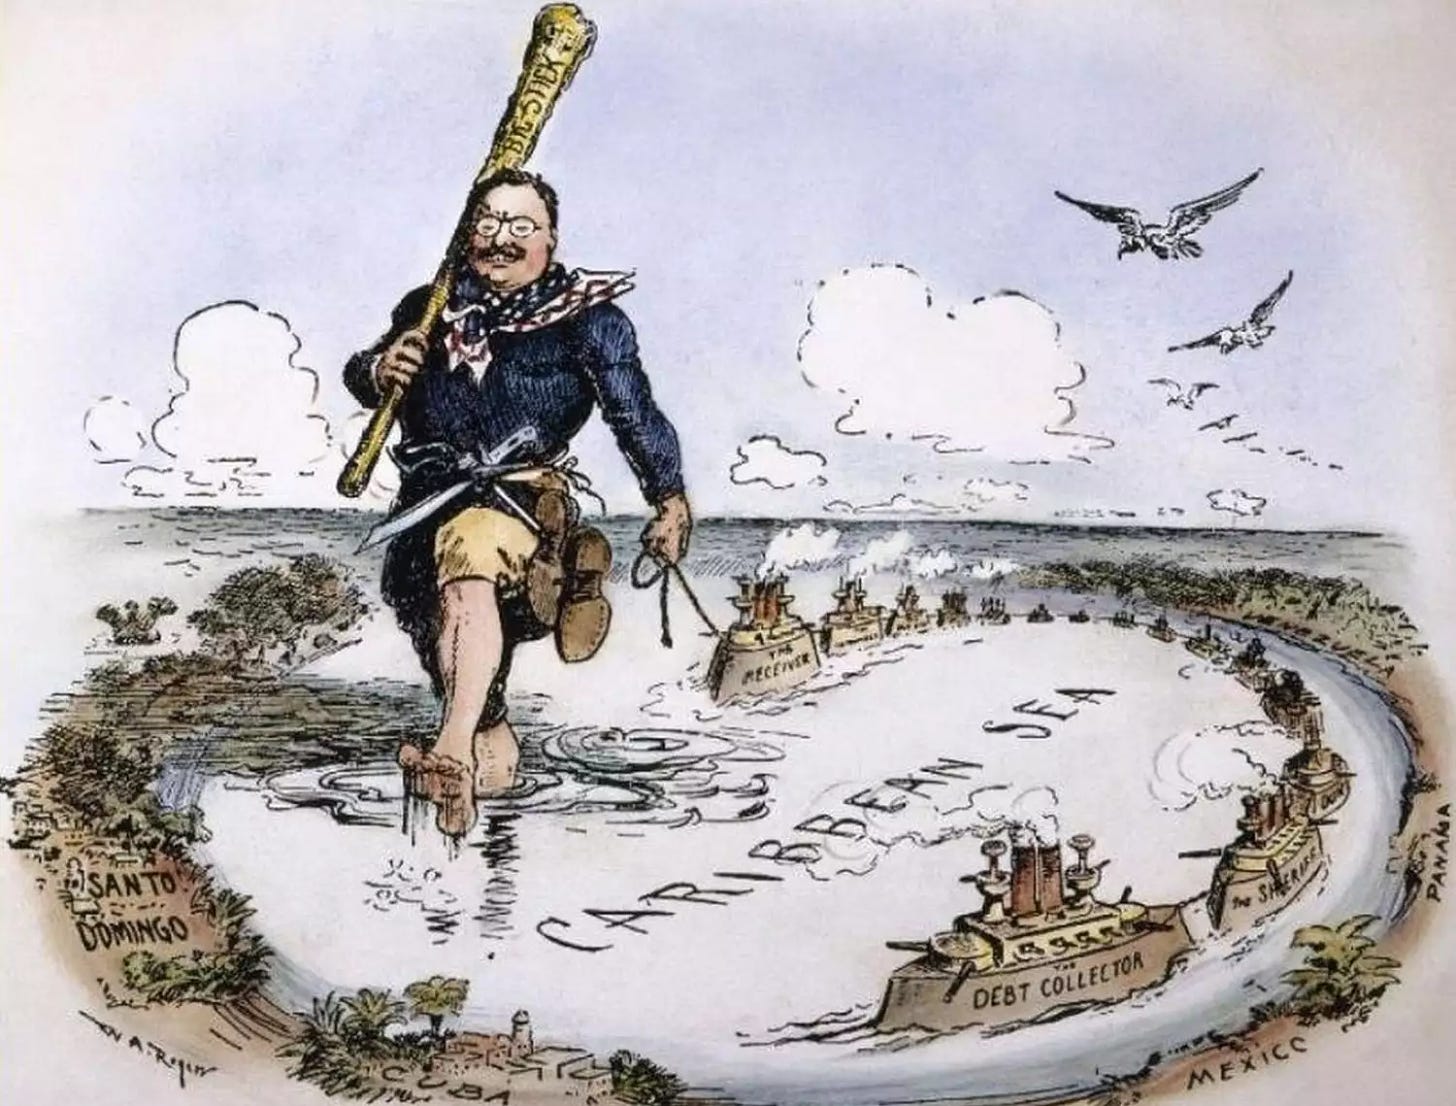 Newspaper cartoon of President Theodore Roosevelt towing US warships across the Caribbean Sea as an illustration of his gunboat diplomacy.